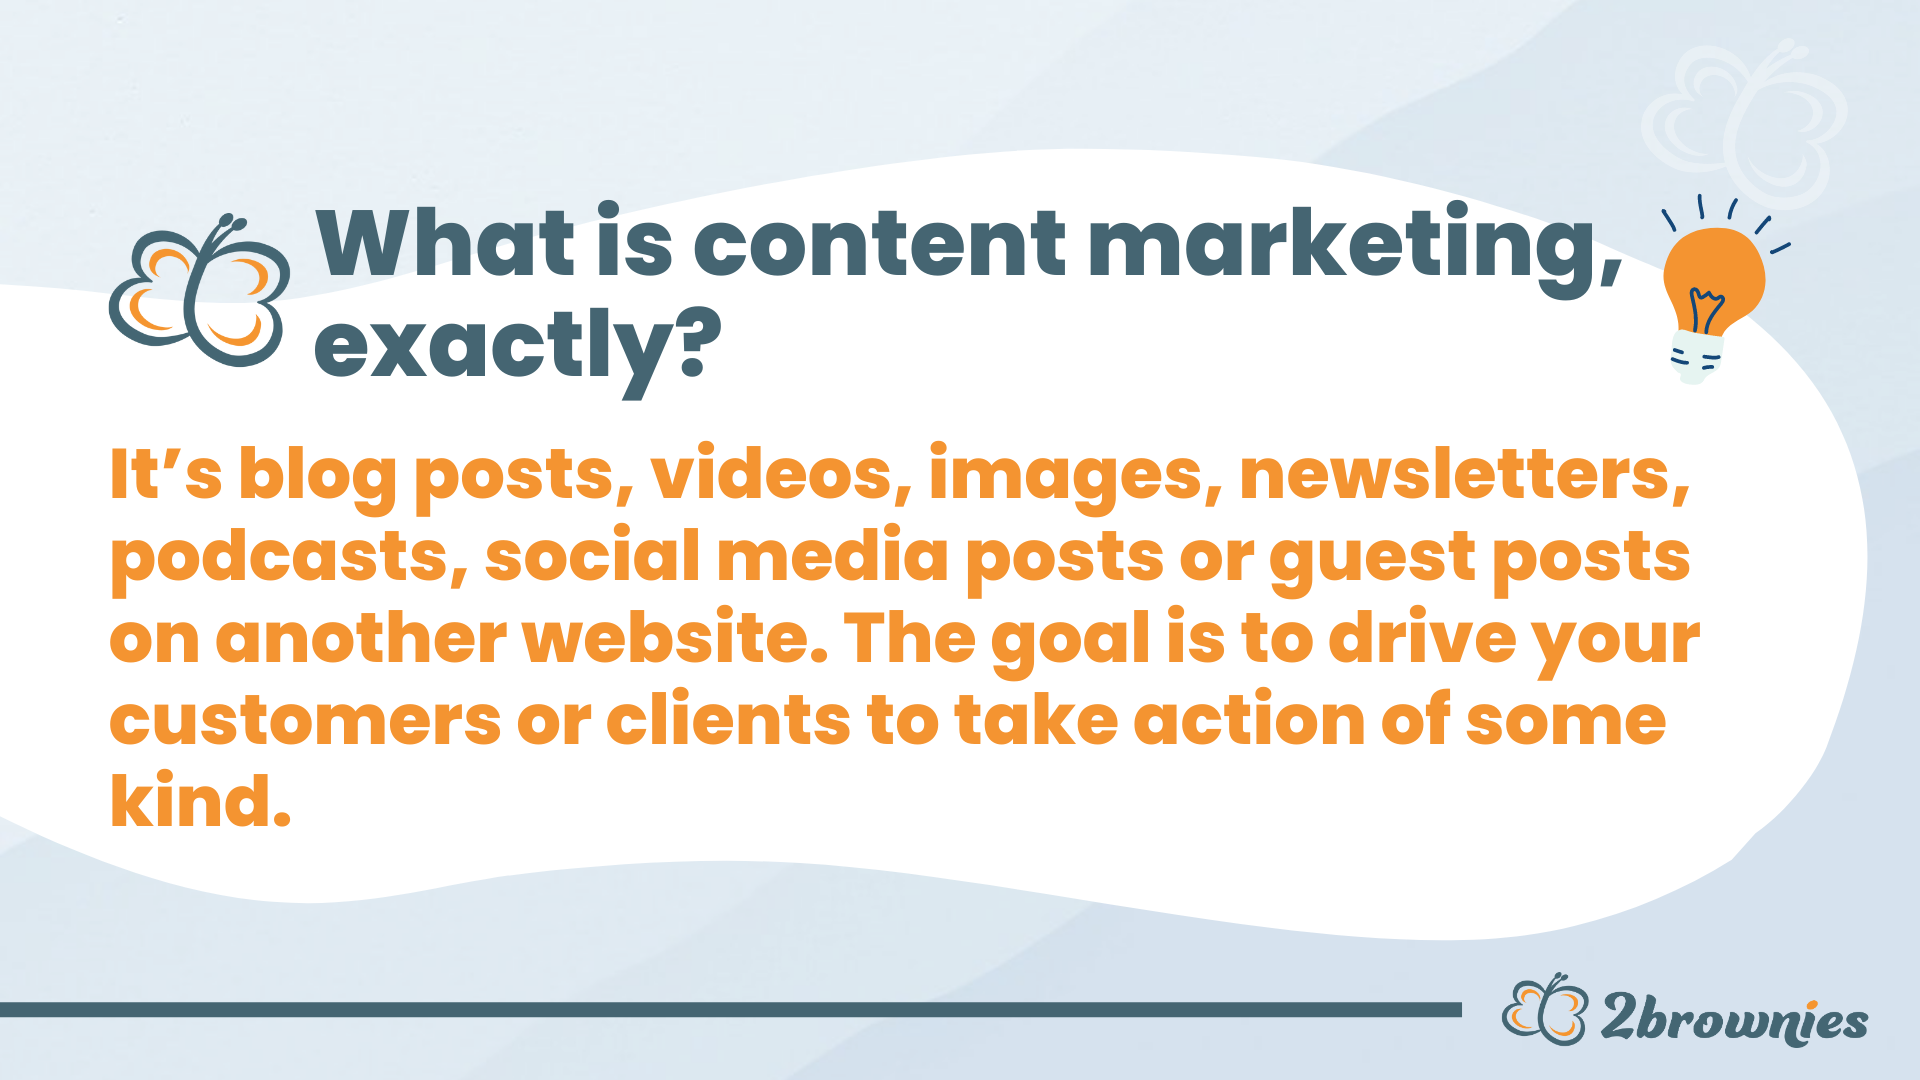 Content marketing can take many forms.